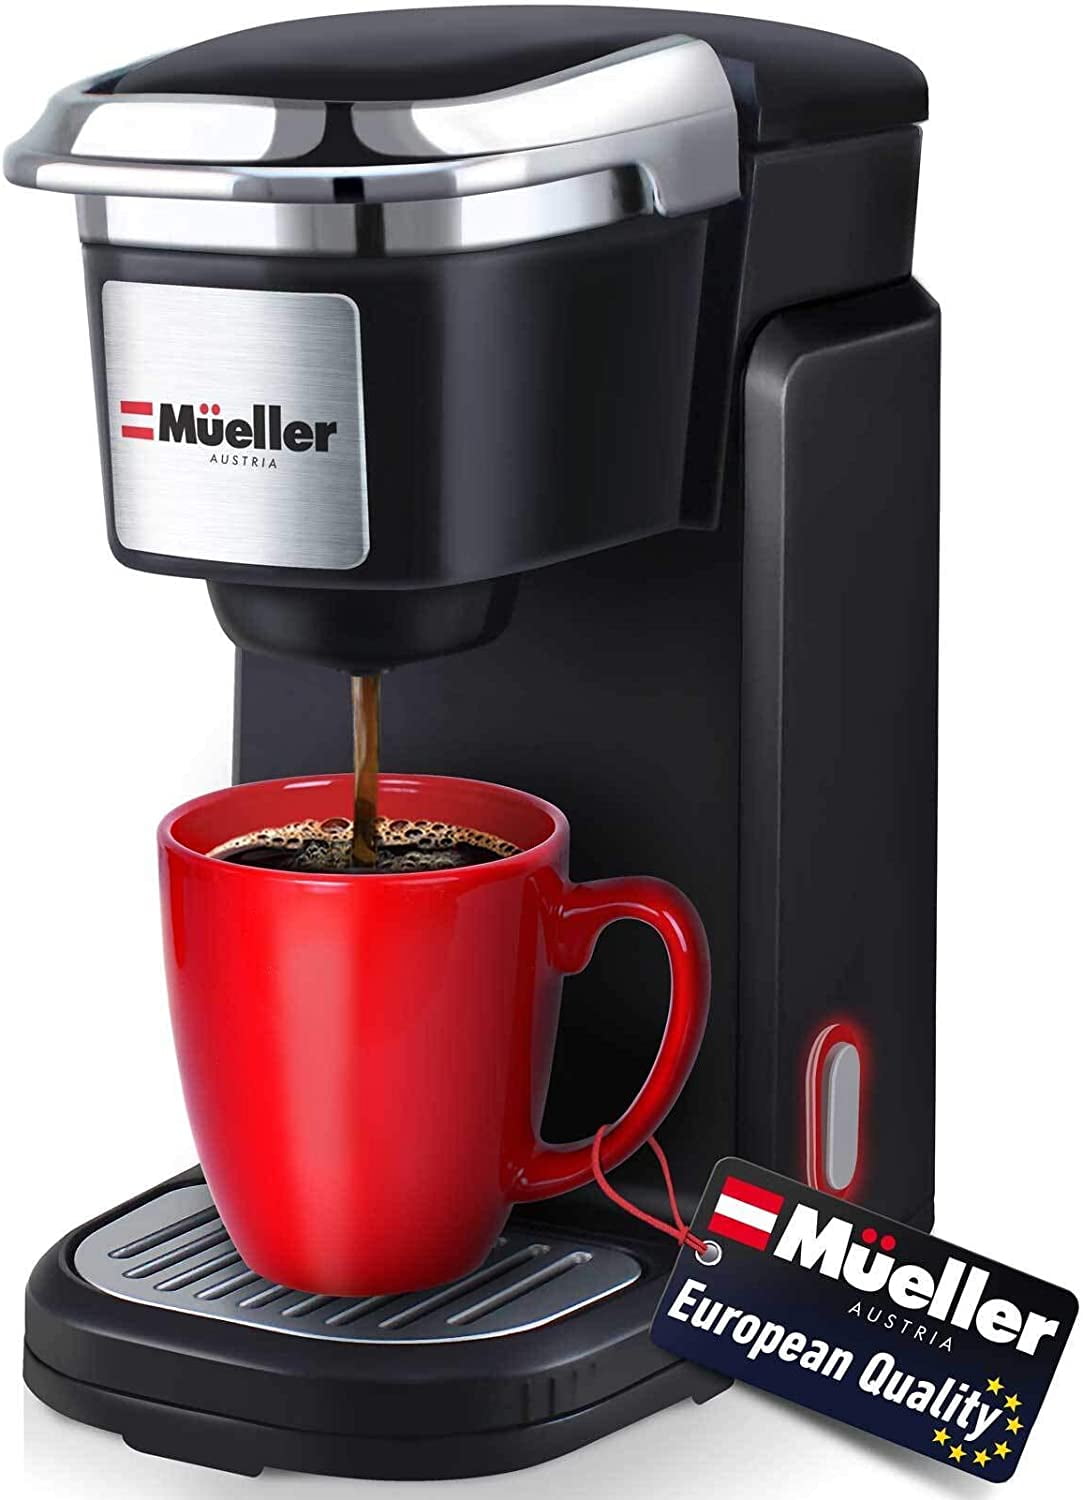 Personal coffee maker